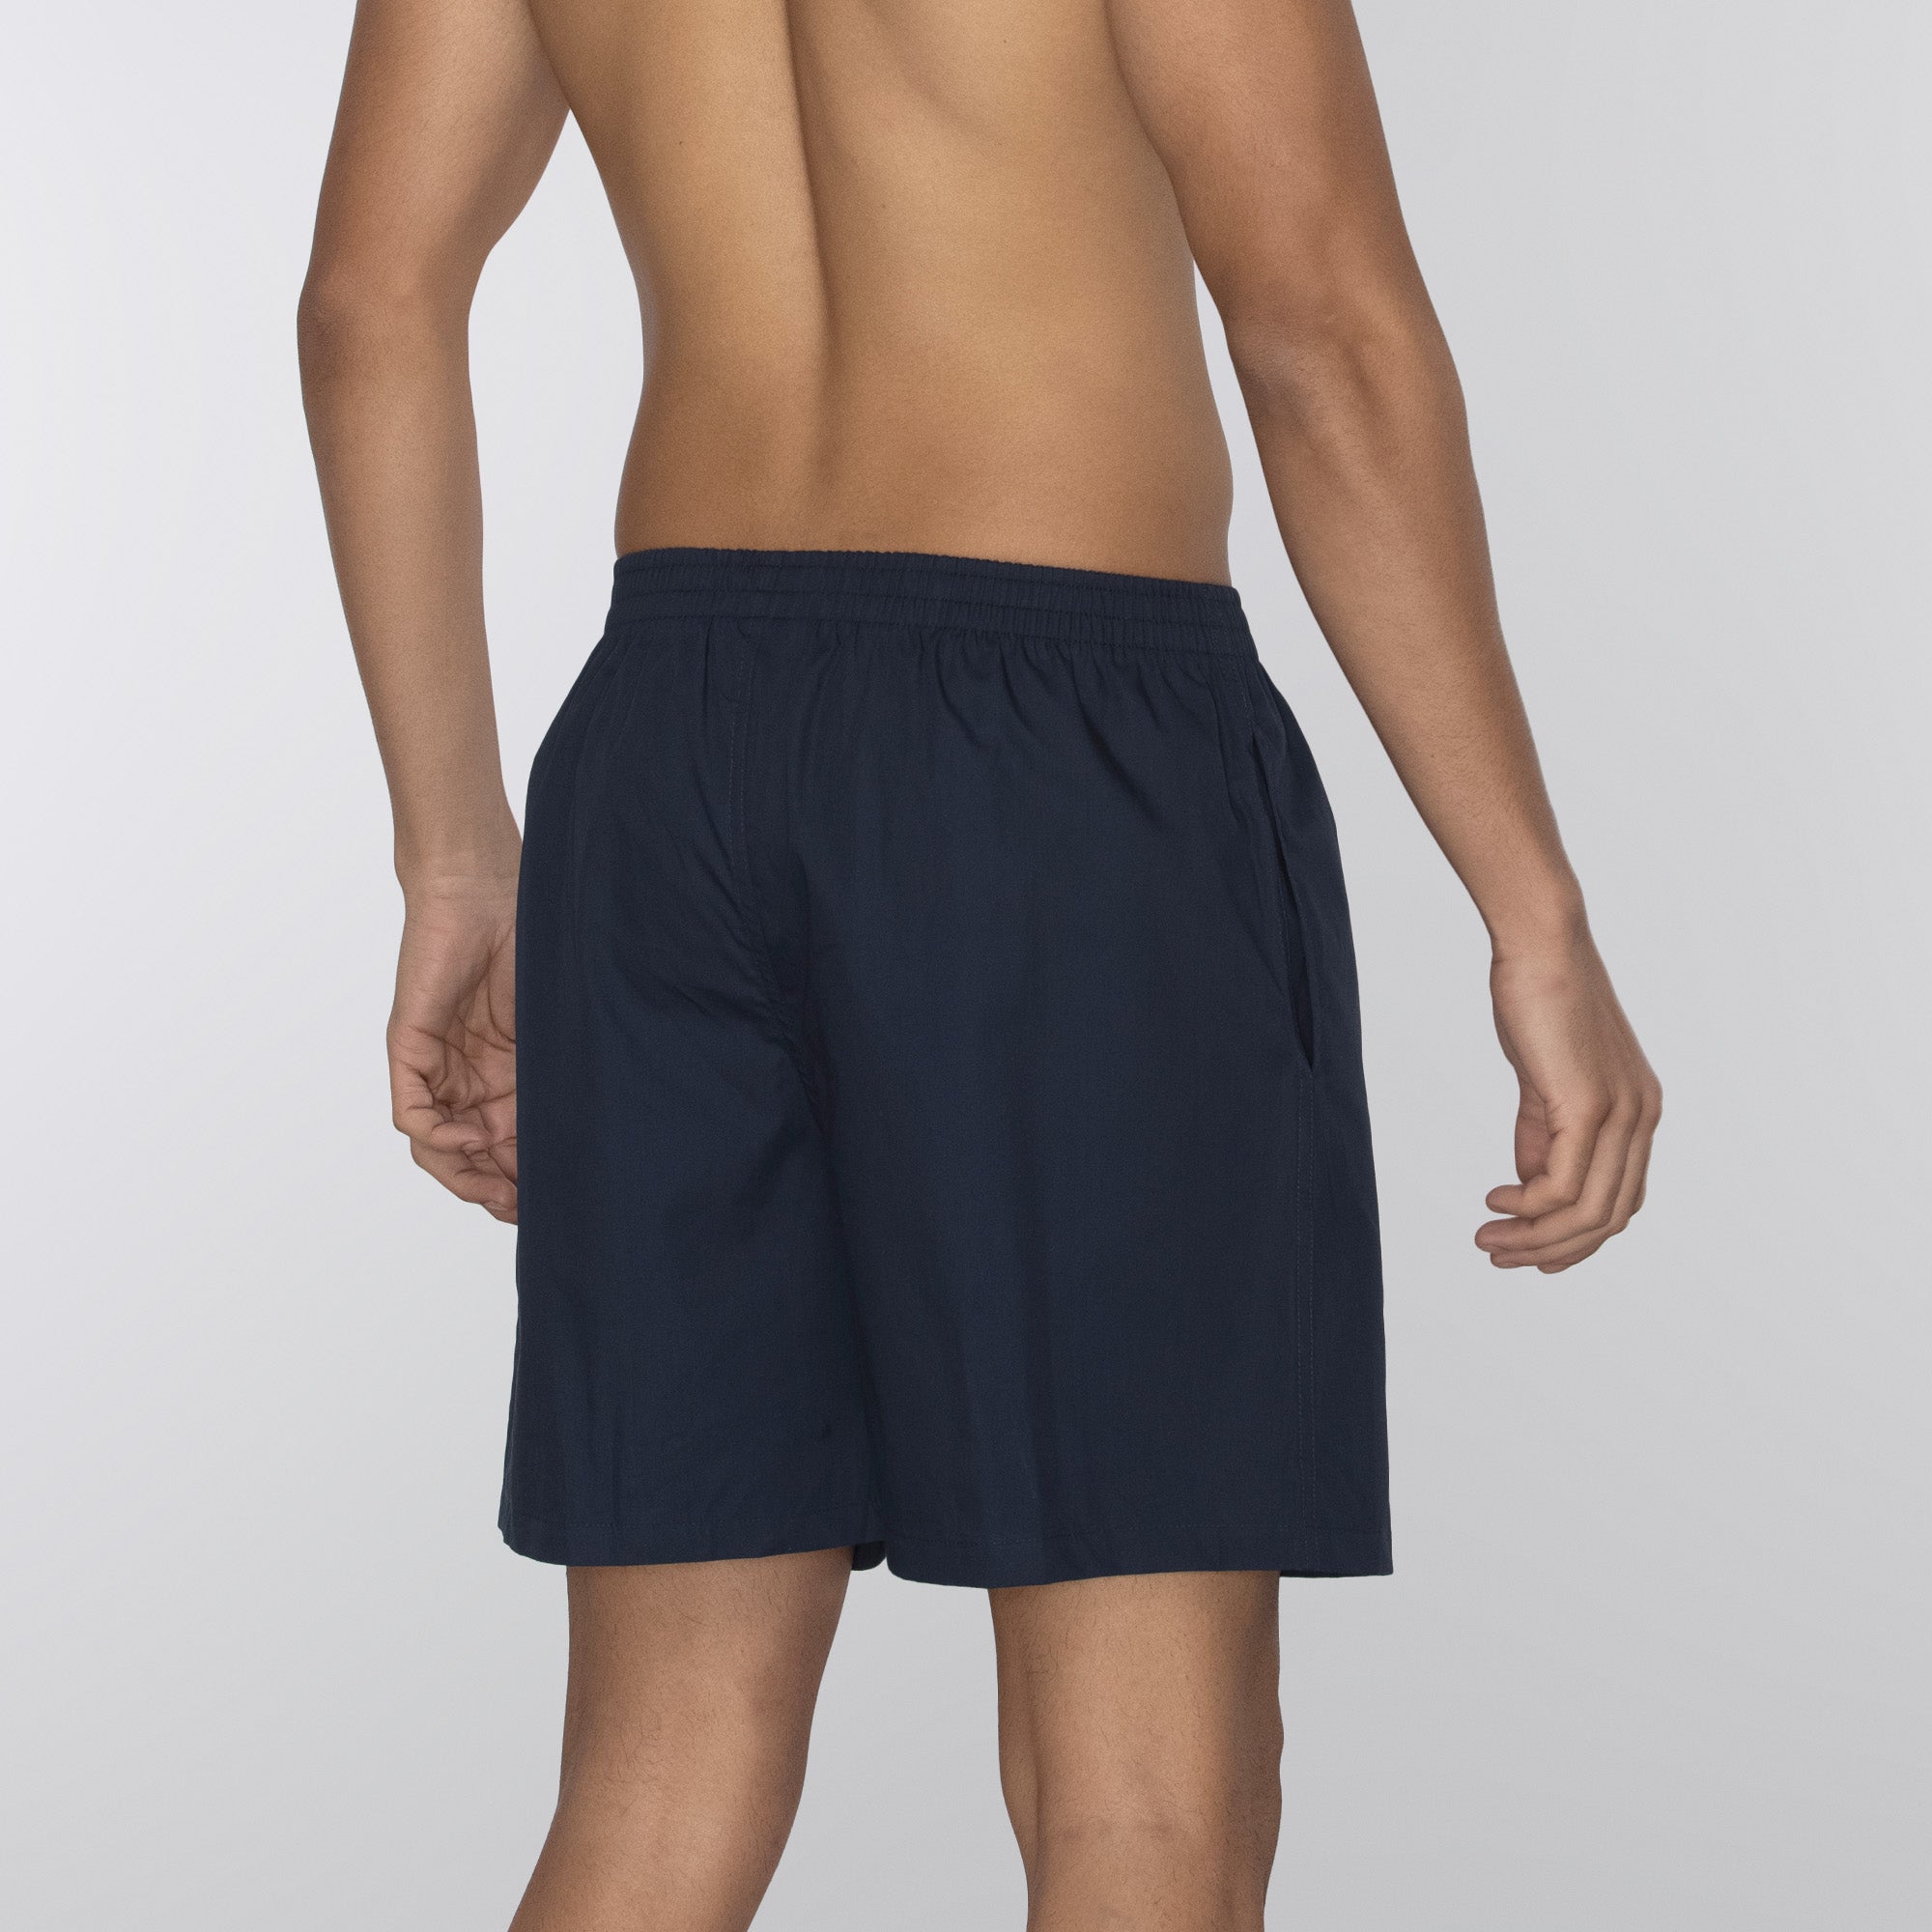 Pace Super Combed Cotton Boxer Shorts For Men Midnight Blue - XYXX Mens Apparels